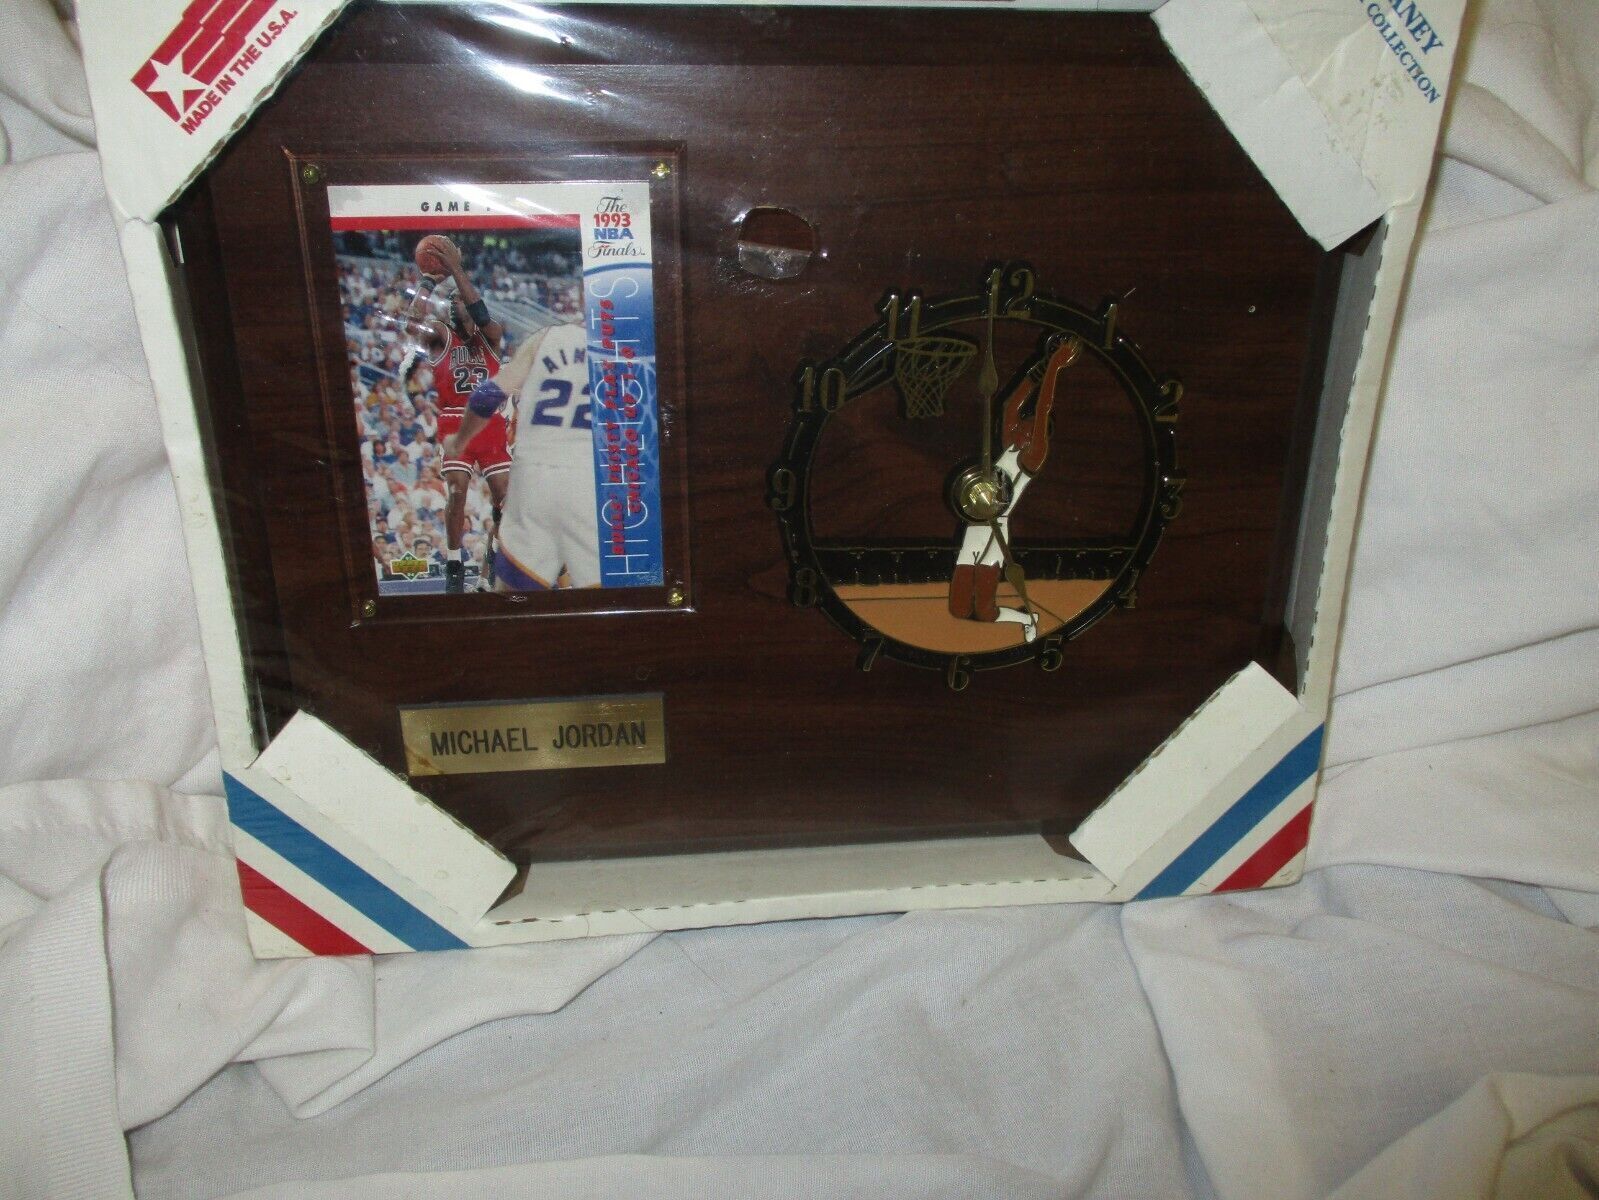 1993 Michael Jordan Chaney Clock on Wood Wall Plaque with NBA Picture